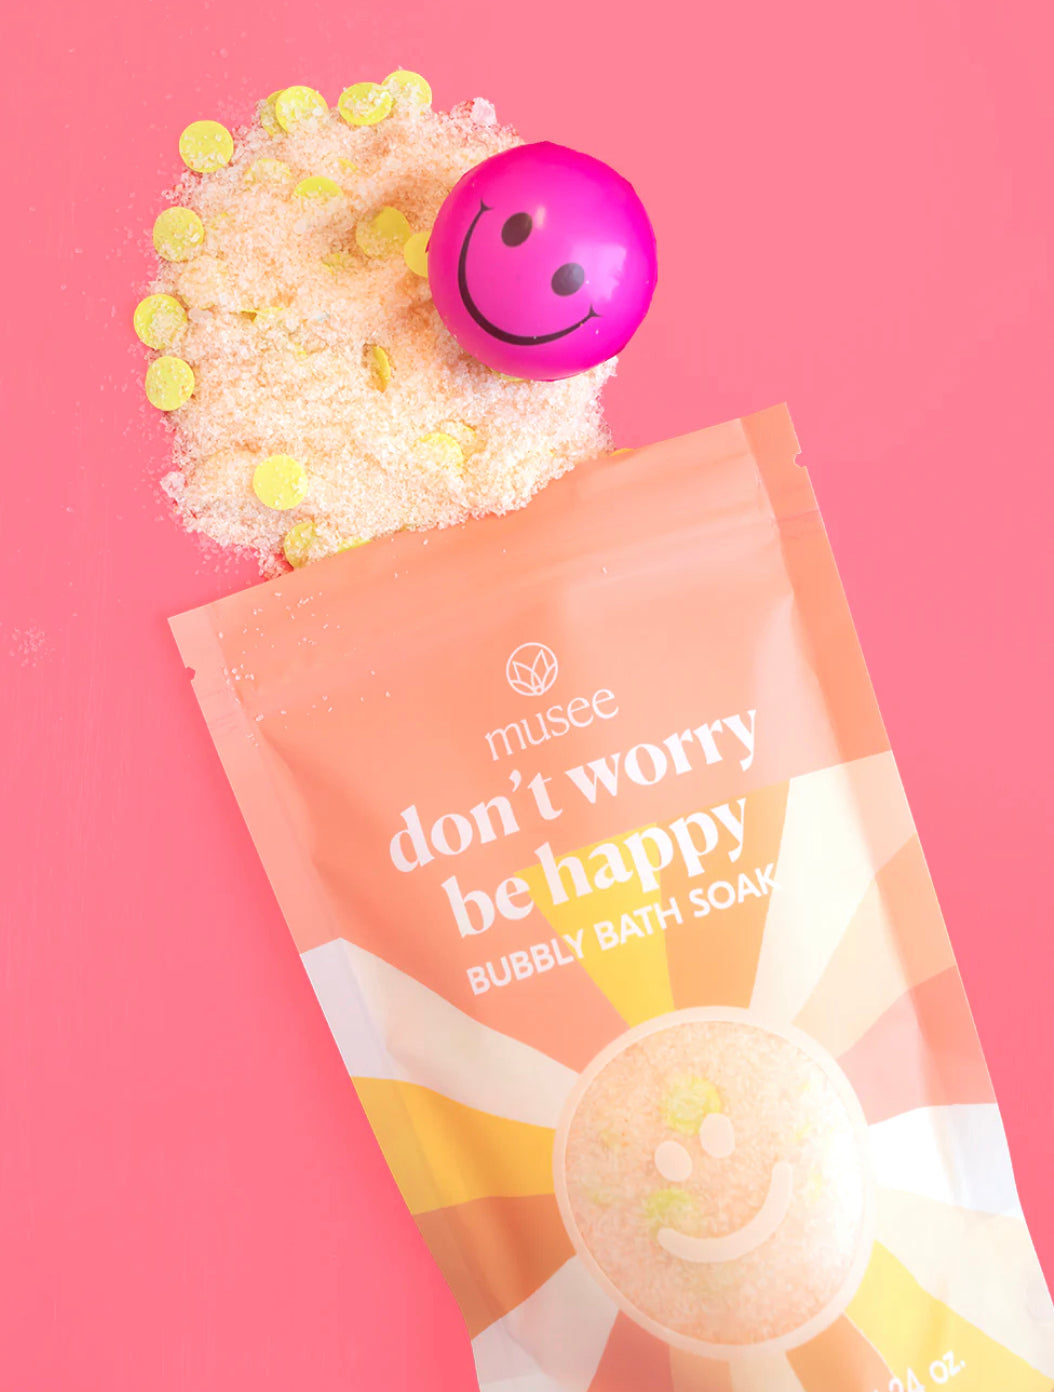 Musee Don't Worry Be Happy Bath Soak